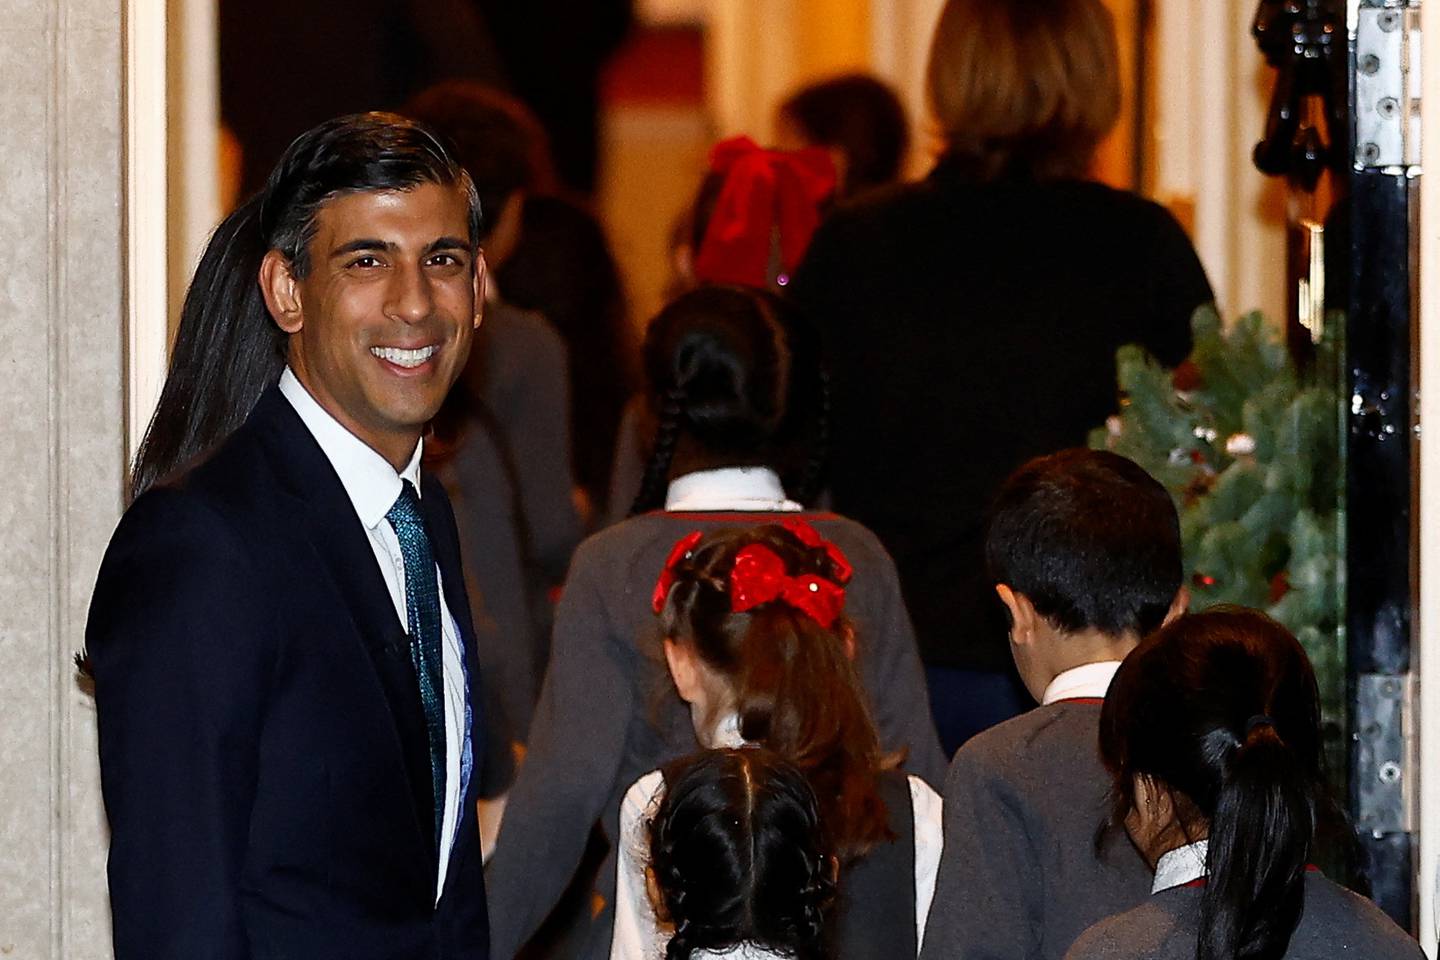 British Prime Minister Rishi Sunak looks on, during the switching on the Christmas tree lights ceremony. On Tuesday he will host a viewing of the England v Wales football match in Downing Street. Reuters